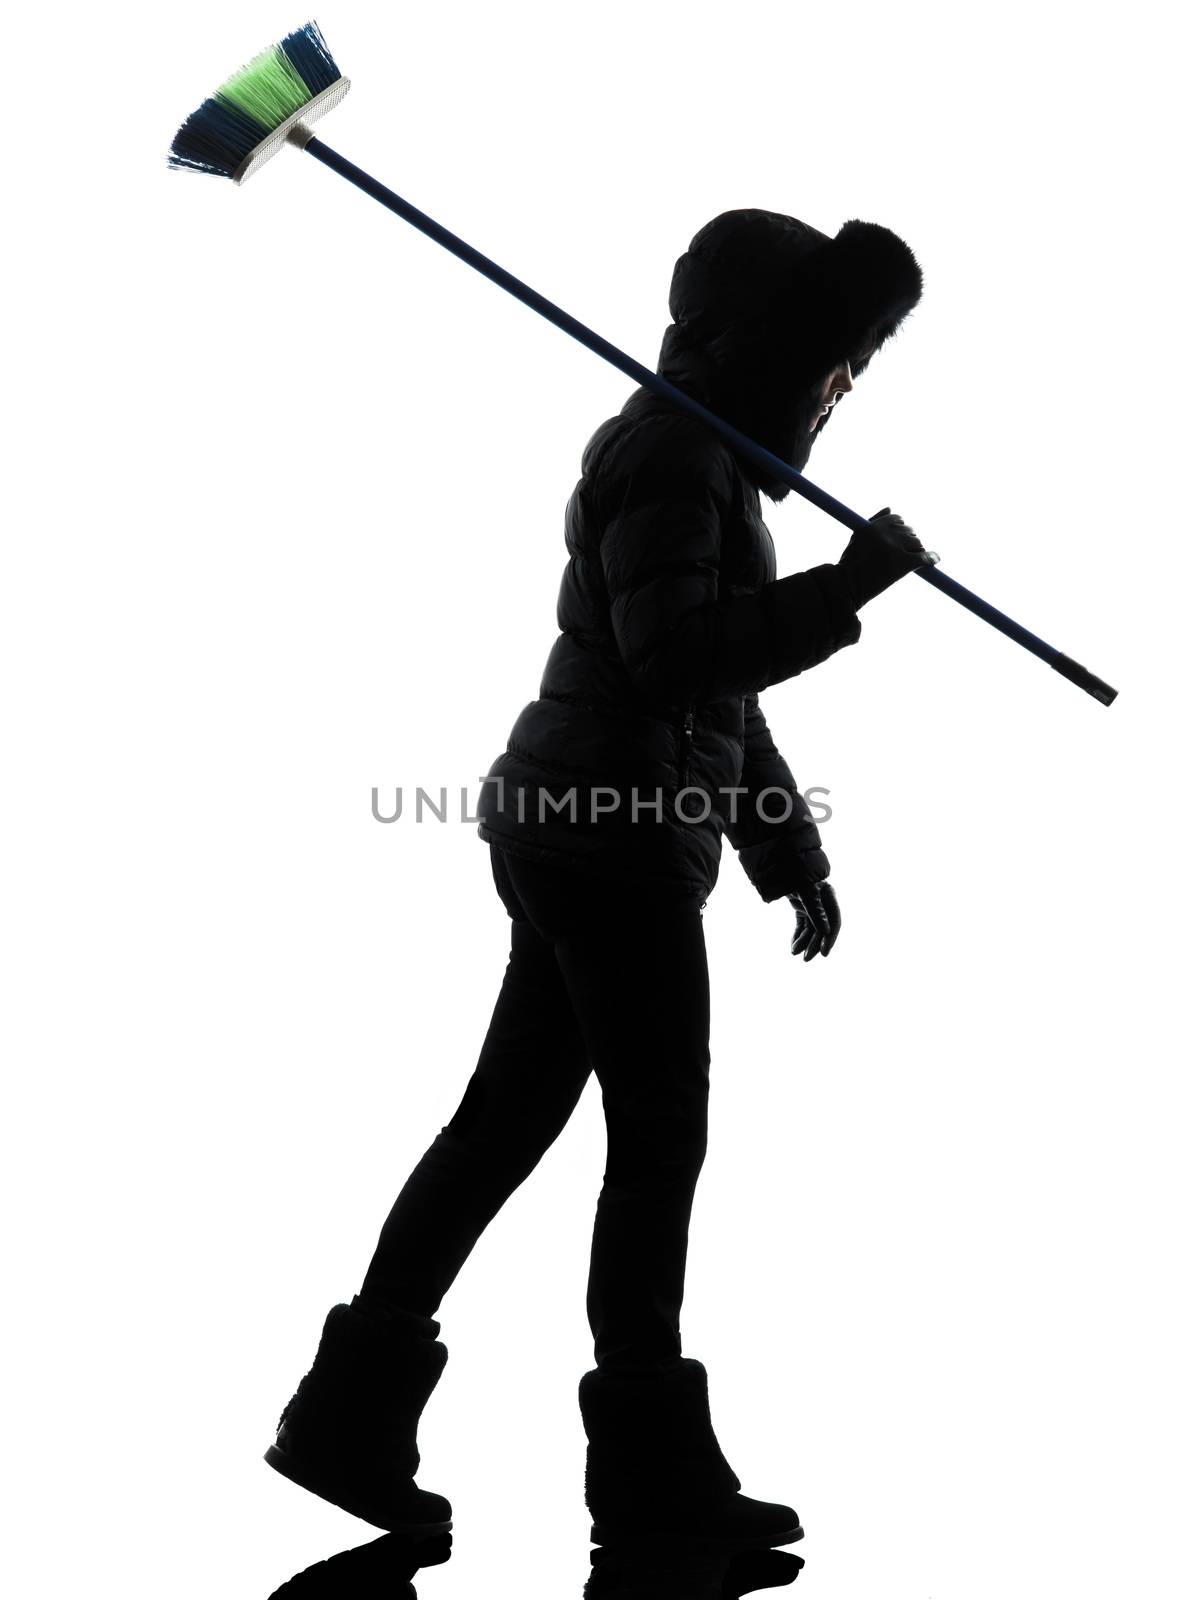 one woman in winter coat walking brooming silhouette on white background